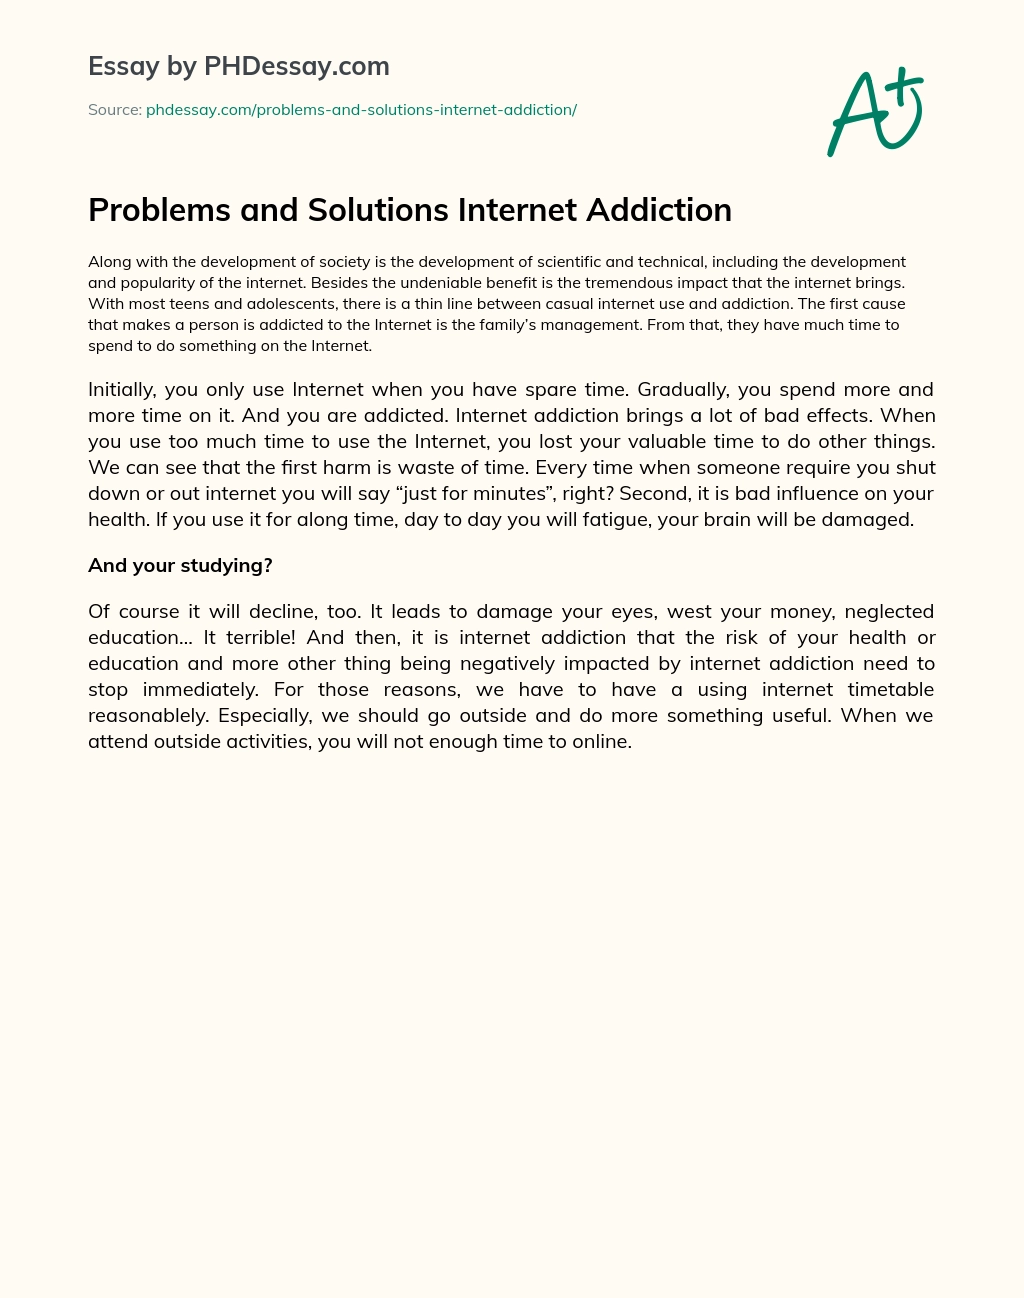 thesis statement about internet addiction